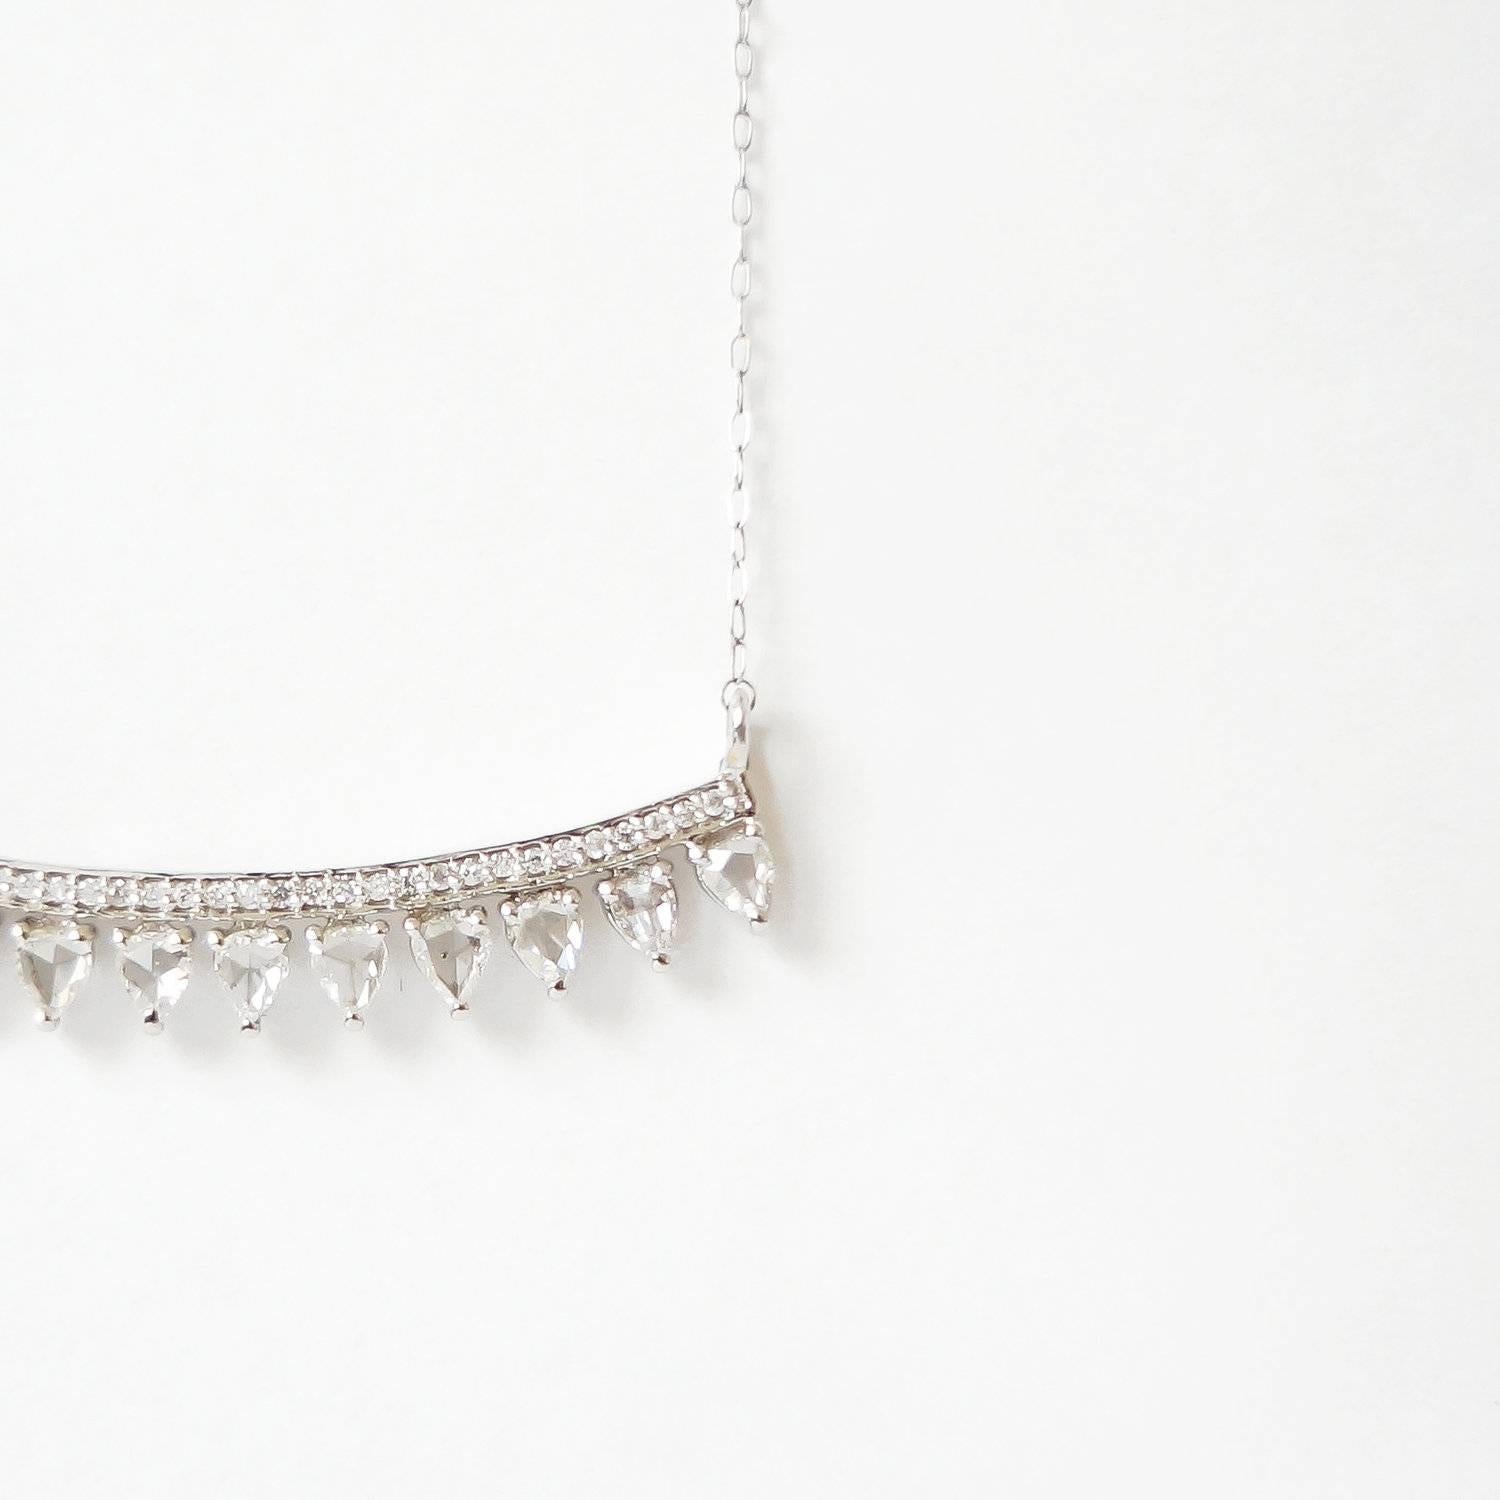 Uniquely mixing bold shapes with stunning gemstones, Ri Noor's Diamond Bar Necklace with Rose Cut Diamonds sparkles as the intricate cuts of the stones reflect light. The necklace features 11 rose cut diamonds suspended from a bar containing